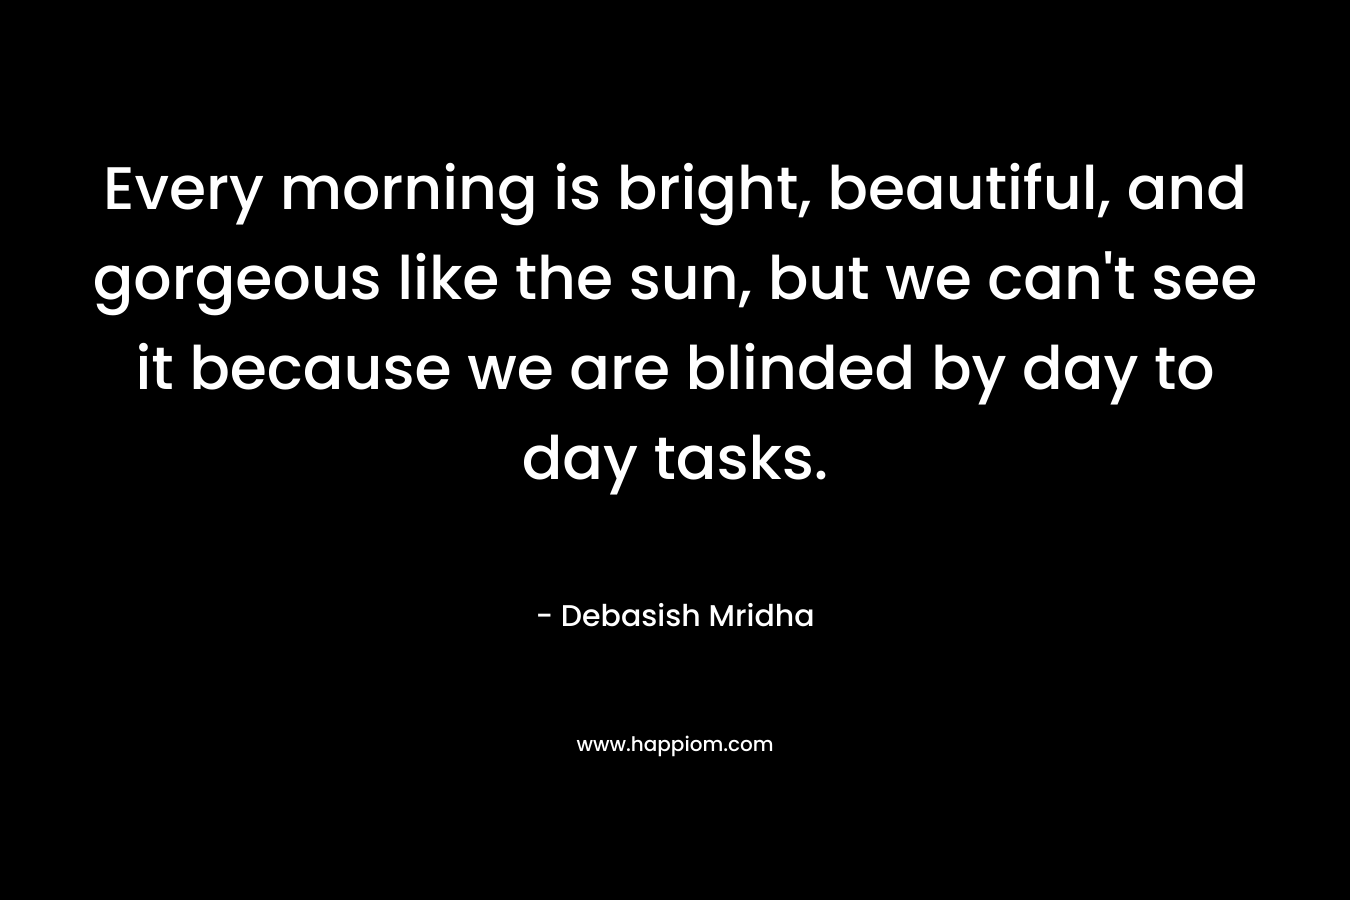 Every morning is bright, beautiful, and gorgeous like the sun, but we can’t see it because we are blinded by day to day tasks. – Debasish Mridha